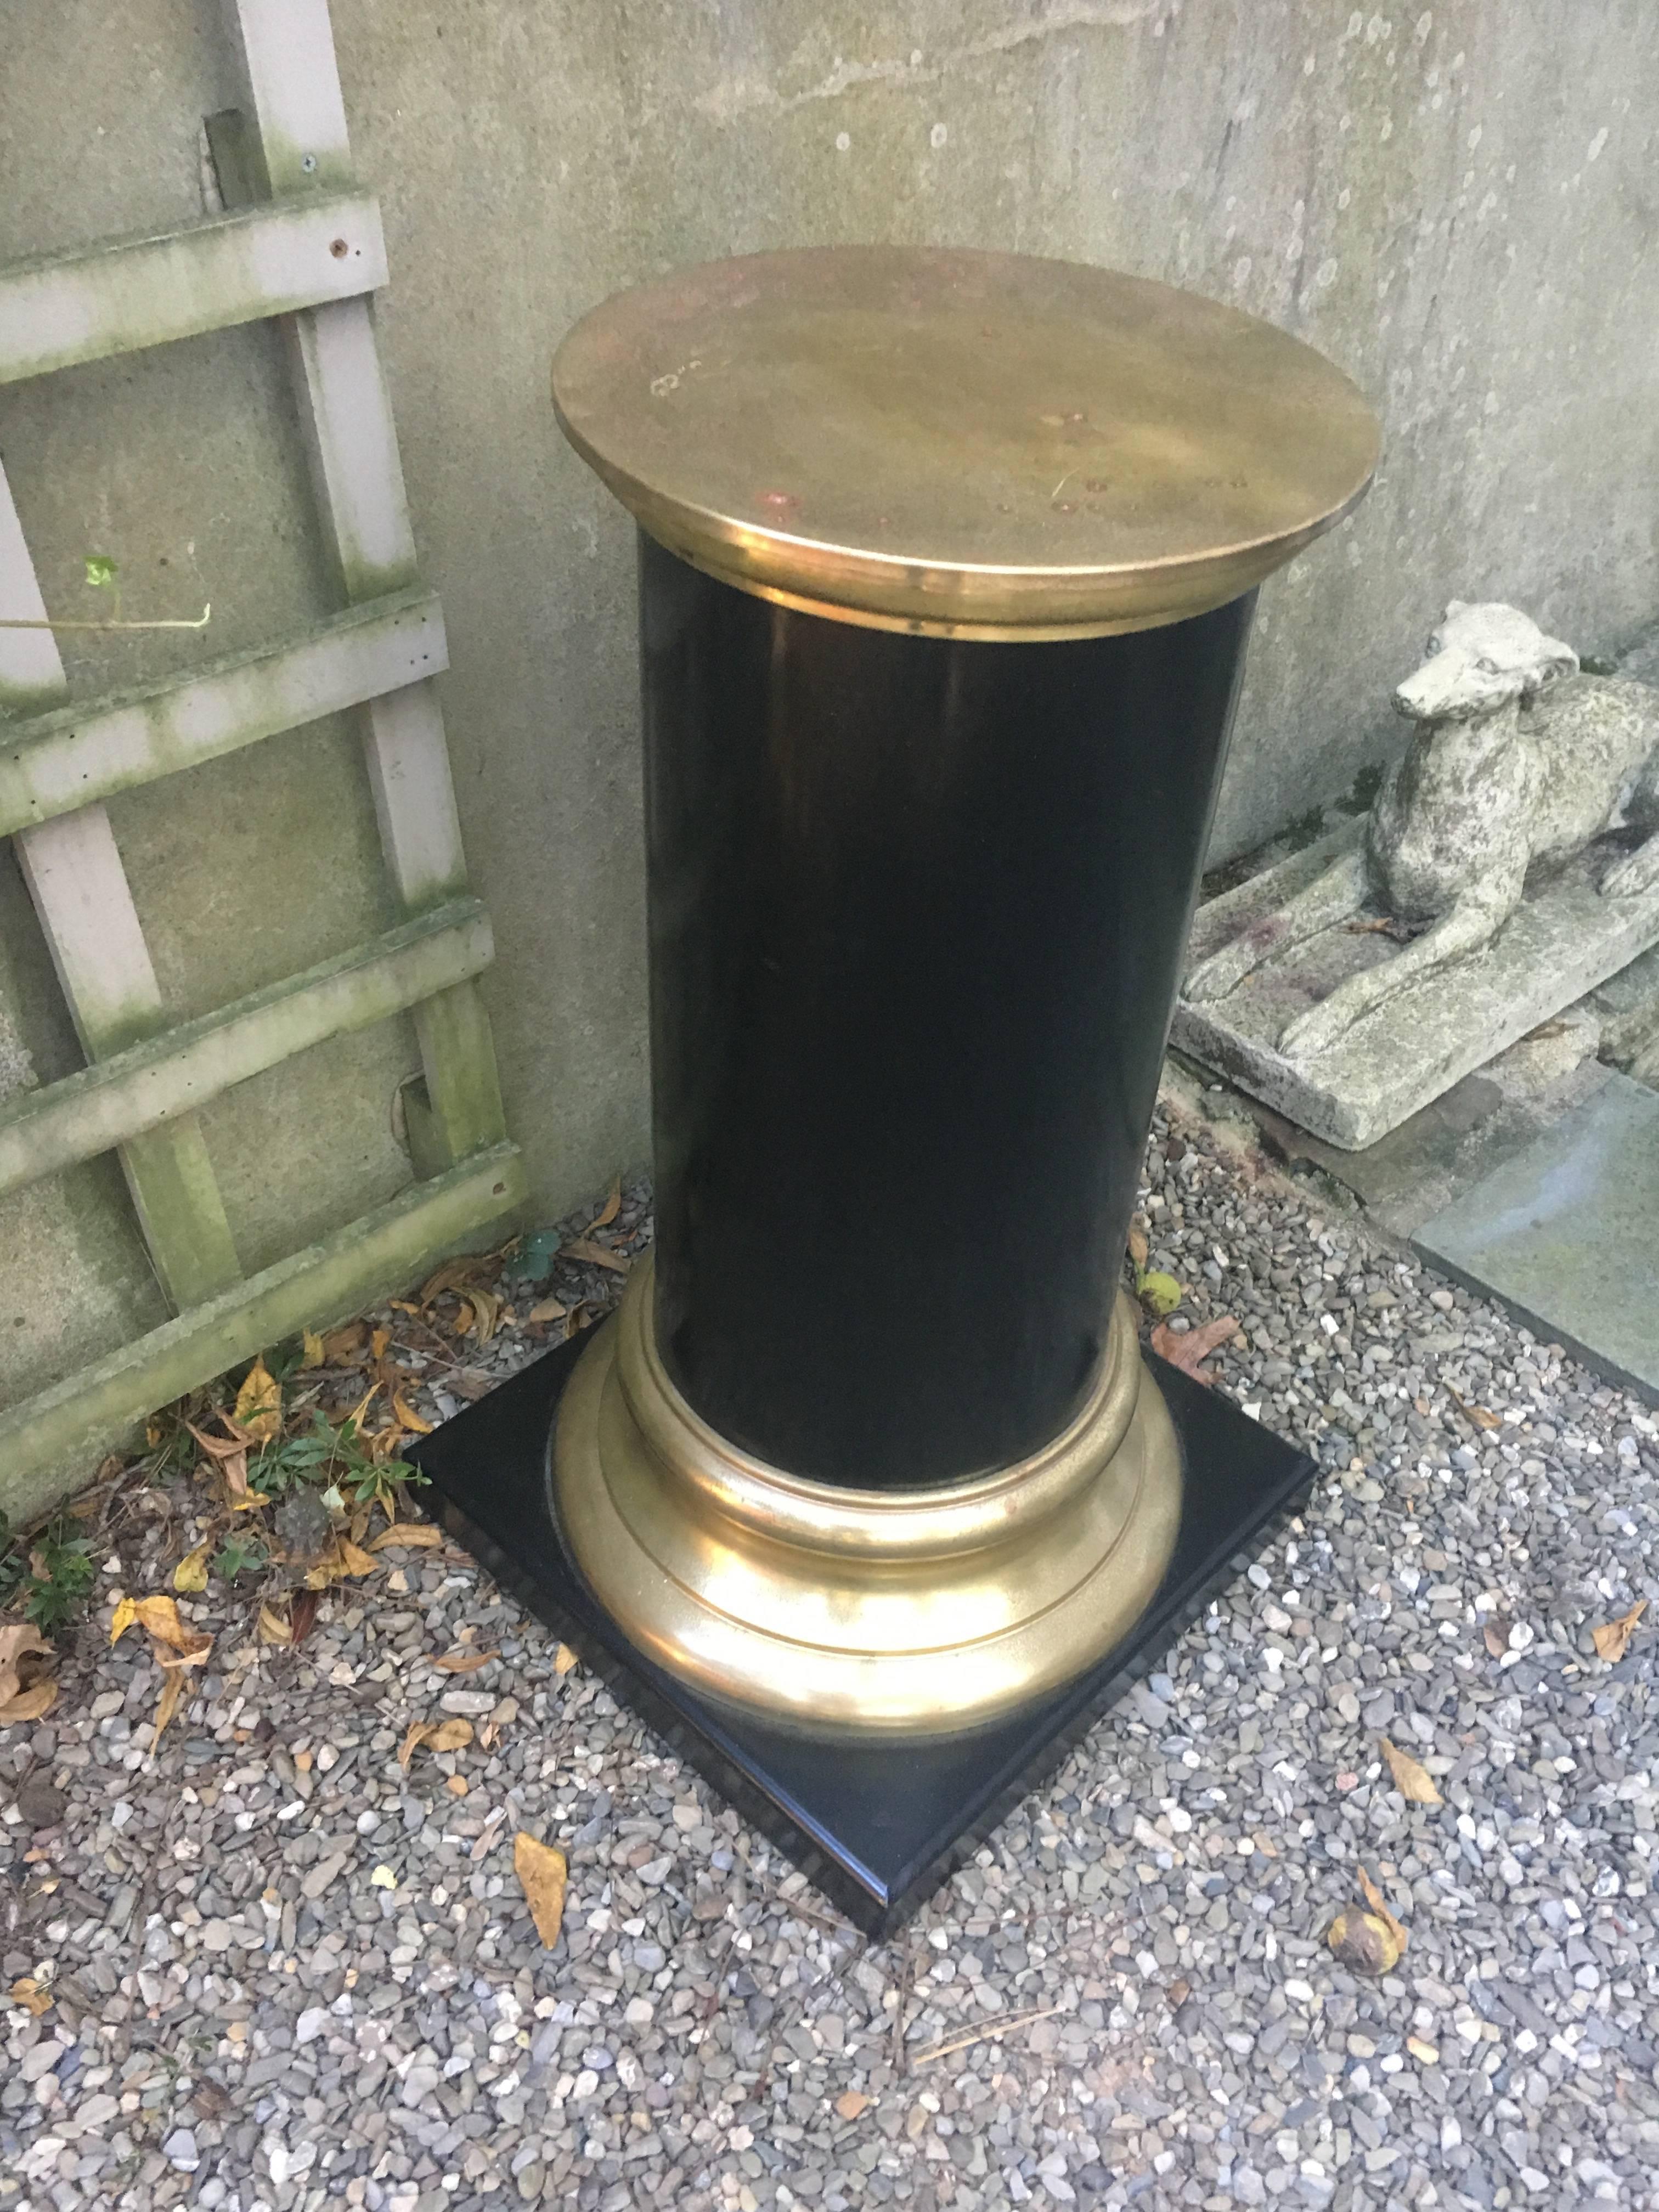 Handsome pair of wood and brass midcentury pedestals. Base is 17 inches square and diameter of brass tops is 13.5. Square base and column is constructed of wood; trim and top is brass. Some dis-colored spots on tops.
   